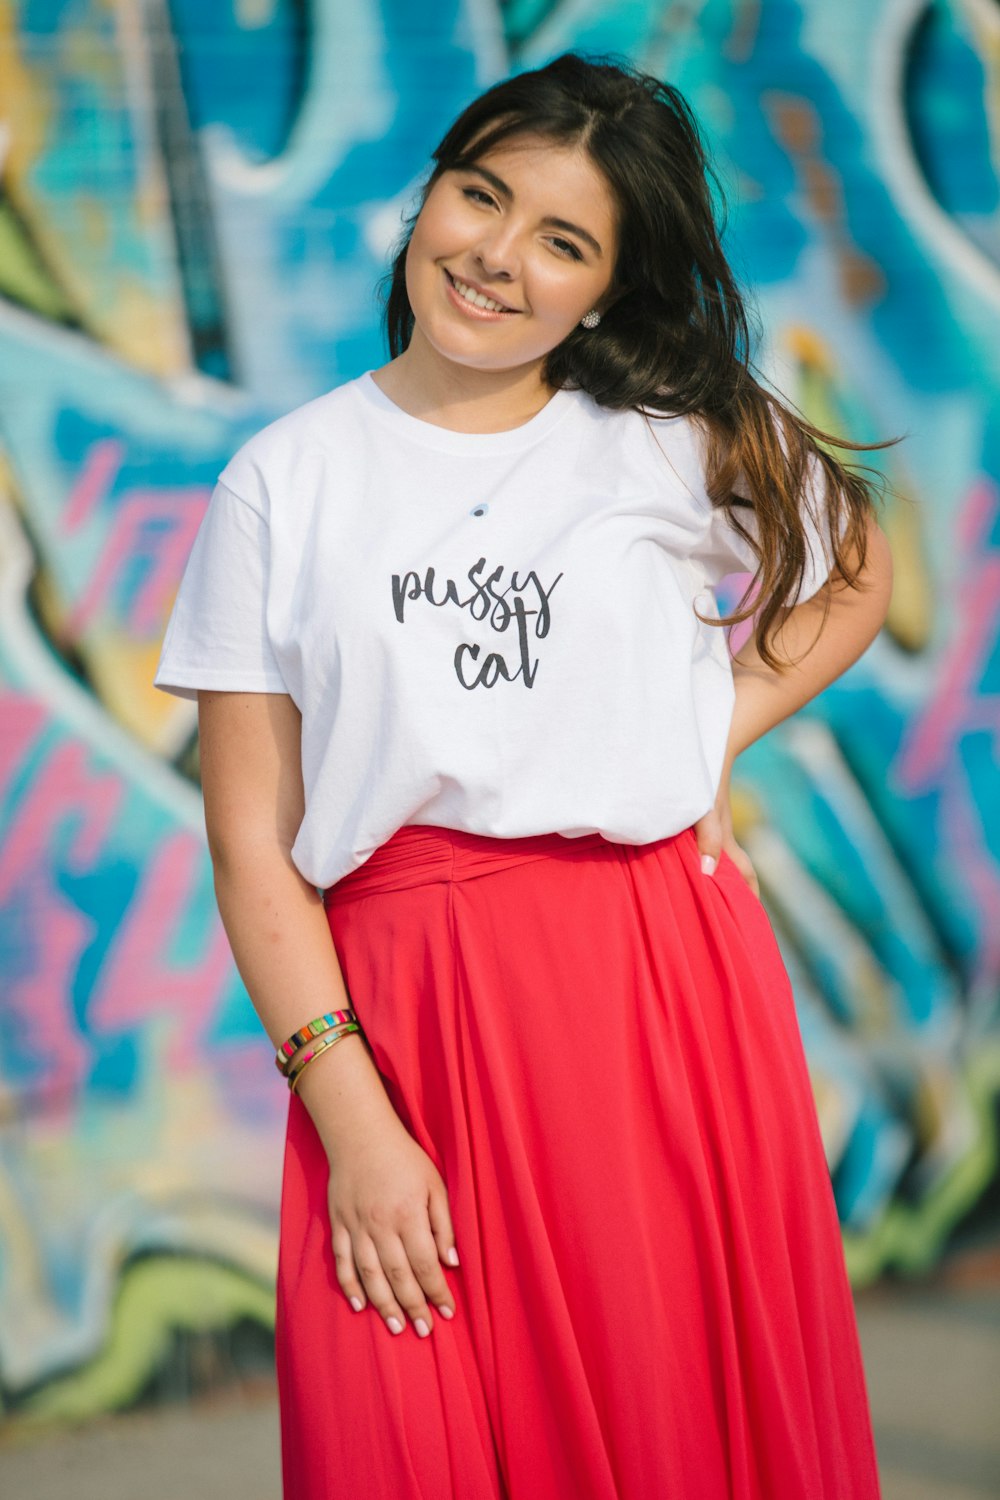 Woman in white crew neck t-shirt and red skirt photo – Free Pink skirt  Image on Unsplash